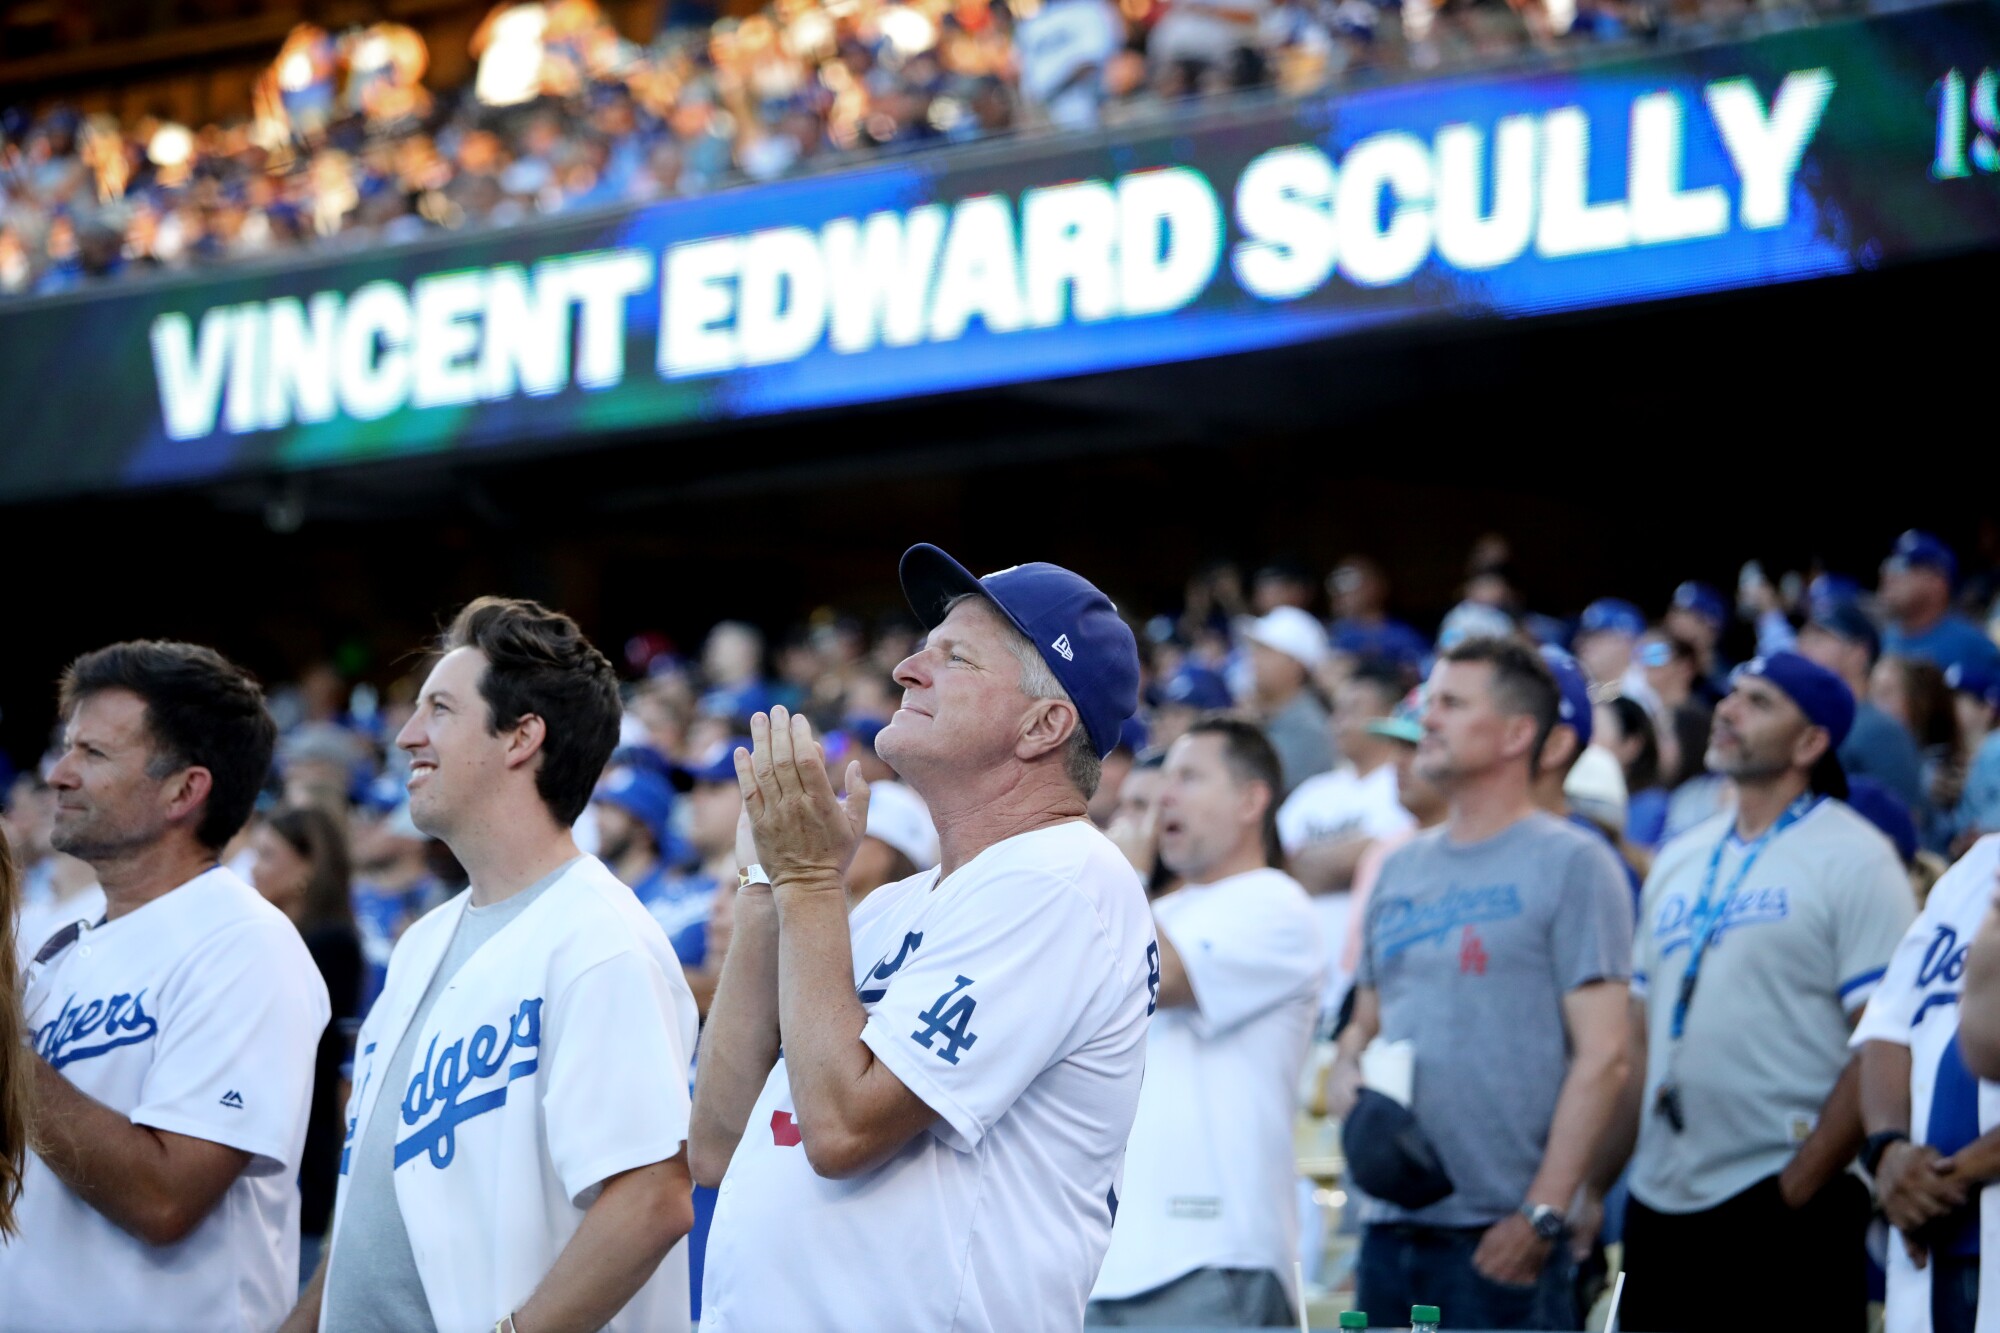 The Los Angeles Dodgers are paying tribute to legendary broadcaster Vin Scully with a special pre-game ceremony.